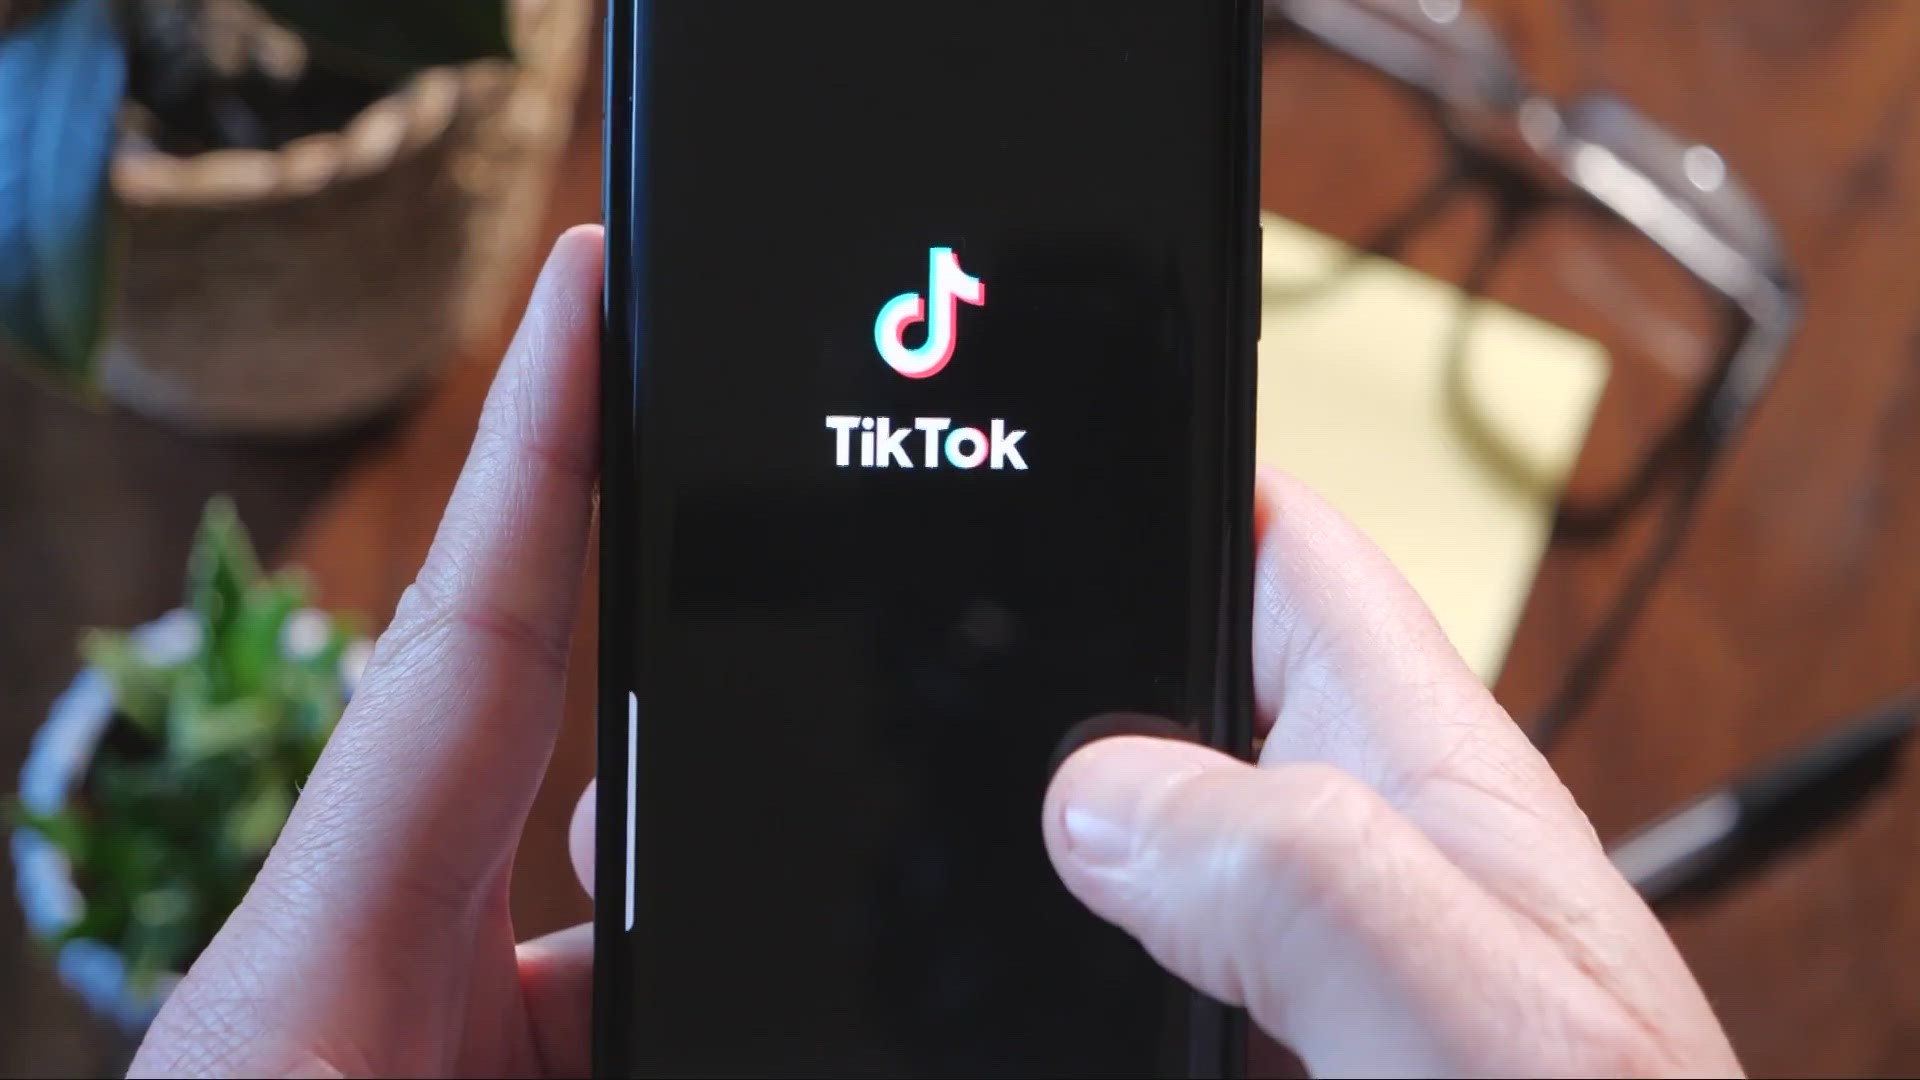 Council unanimously passed a resolution earlier this month urging Mayor Justin Bibb and Law Director Barbara Langhenry to sue TikTok.